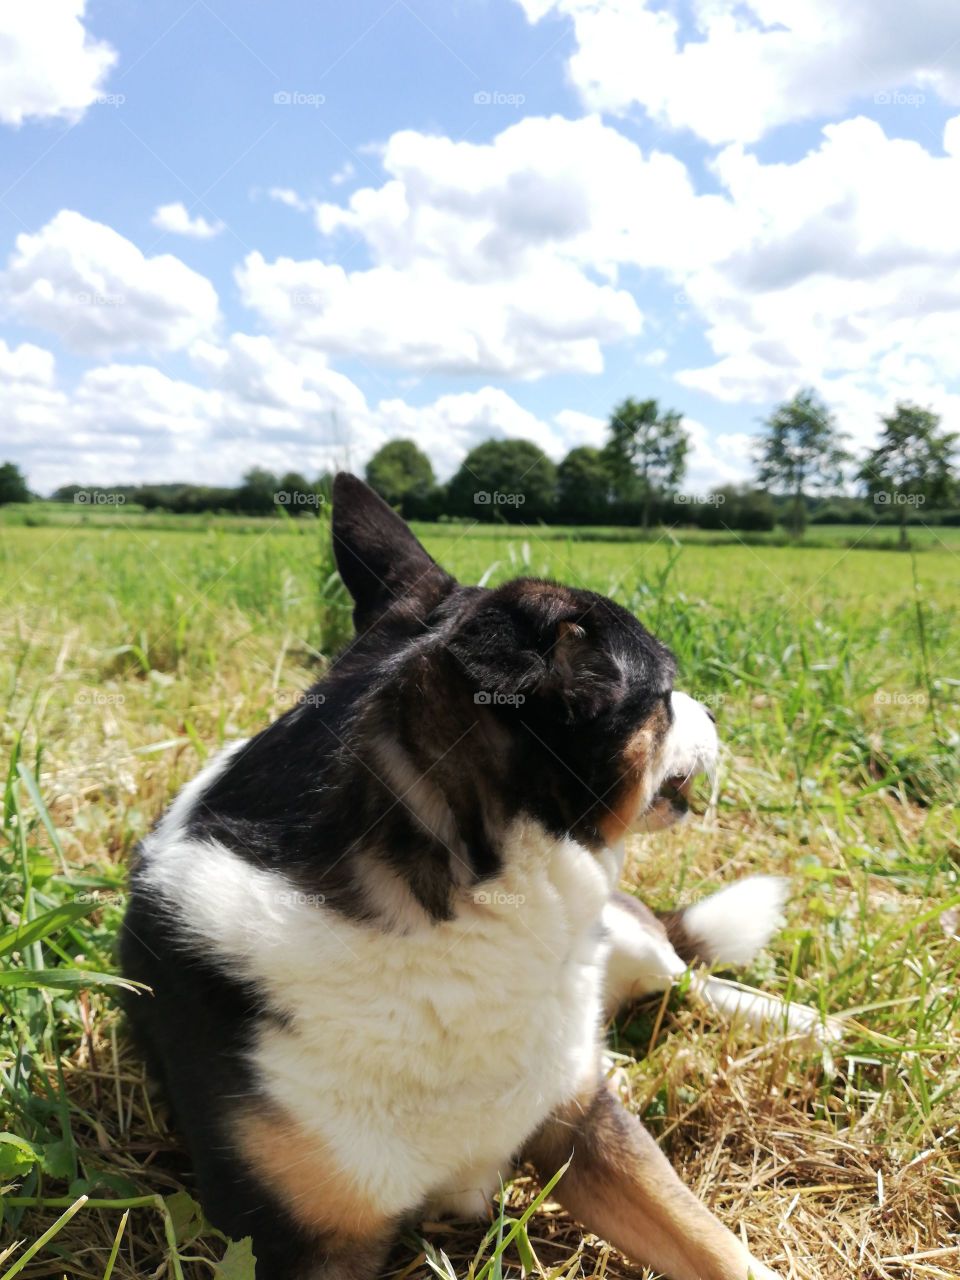 Dog looking over his shoulder in a field with green grass and a blue sky with clouds in the background